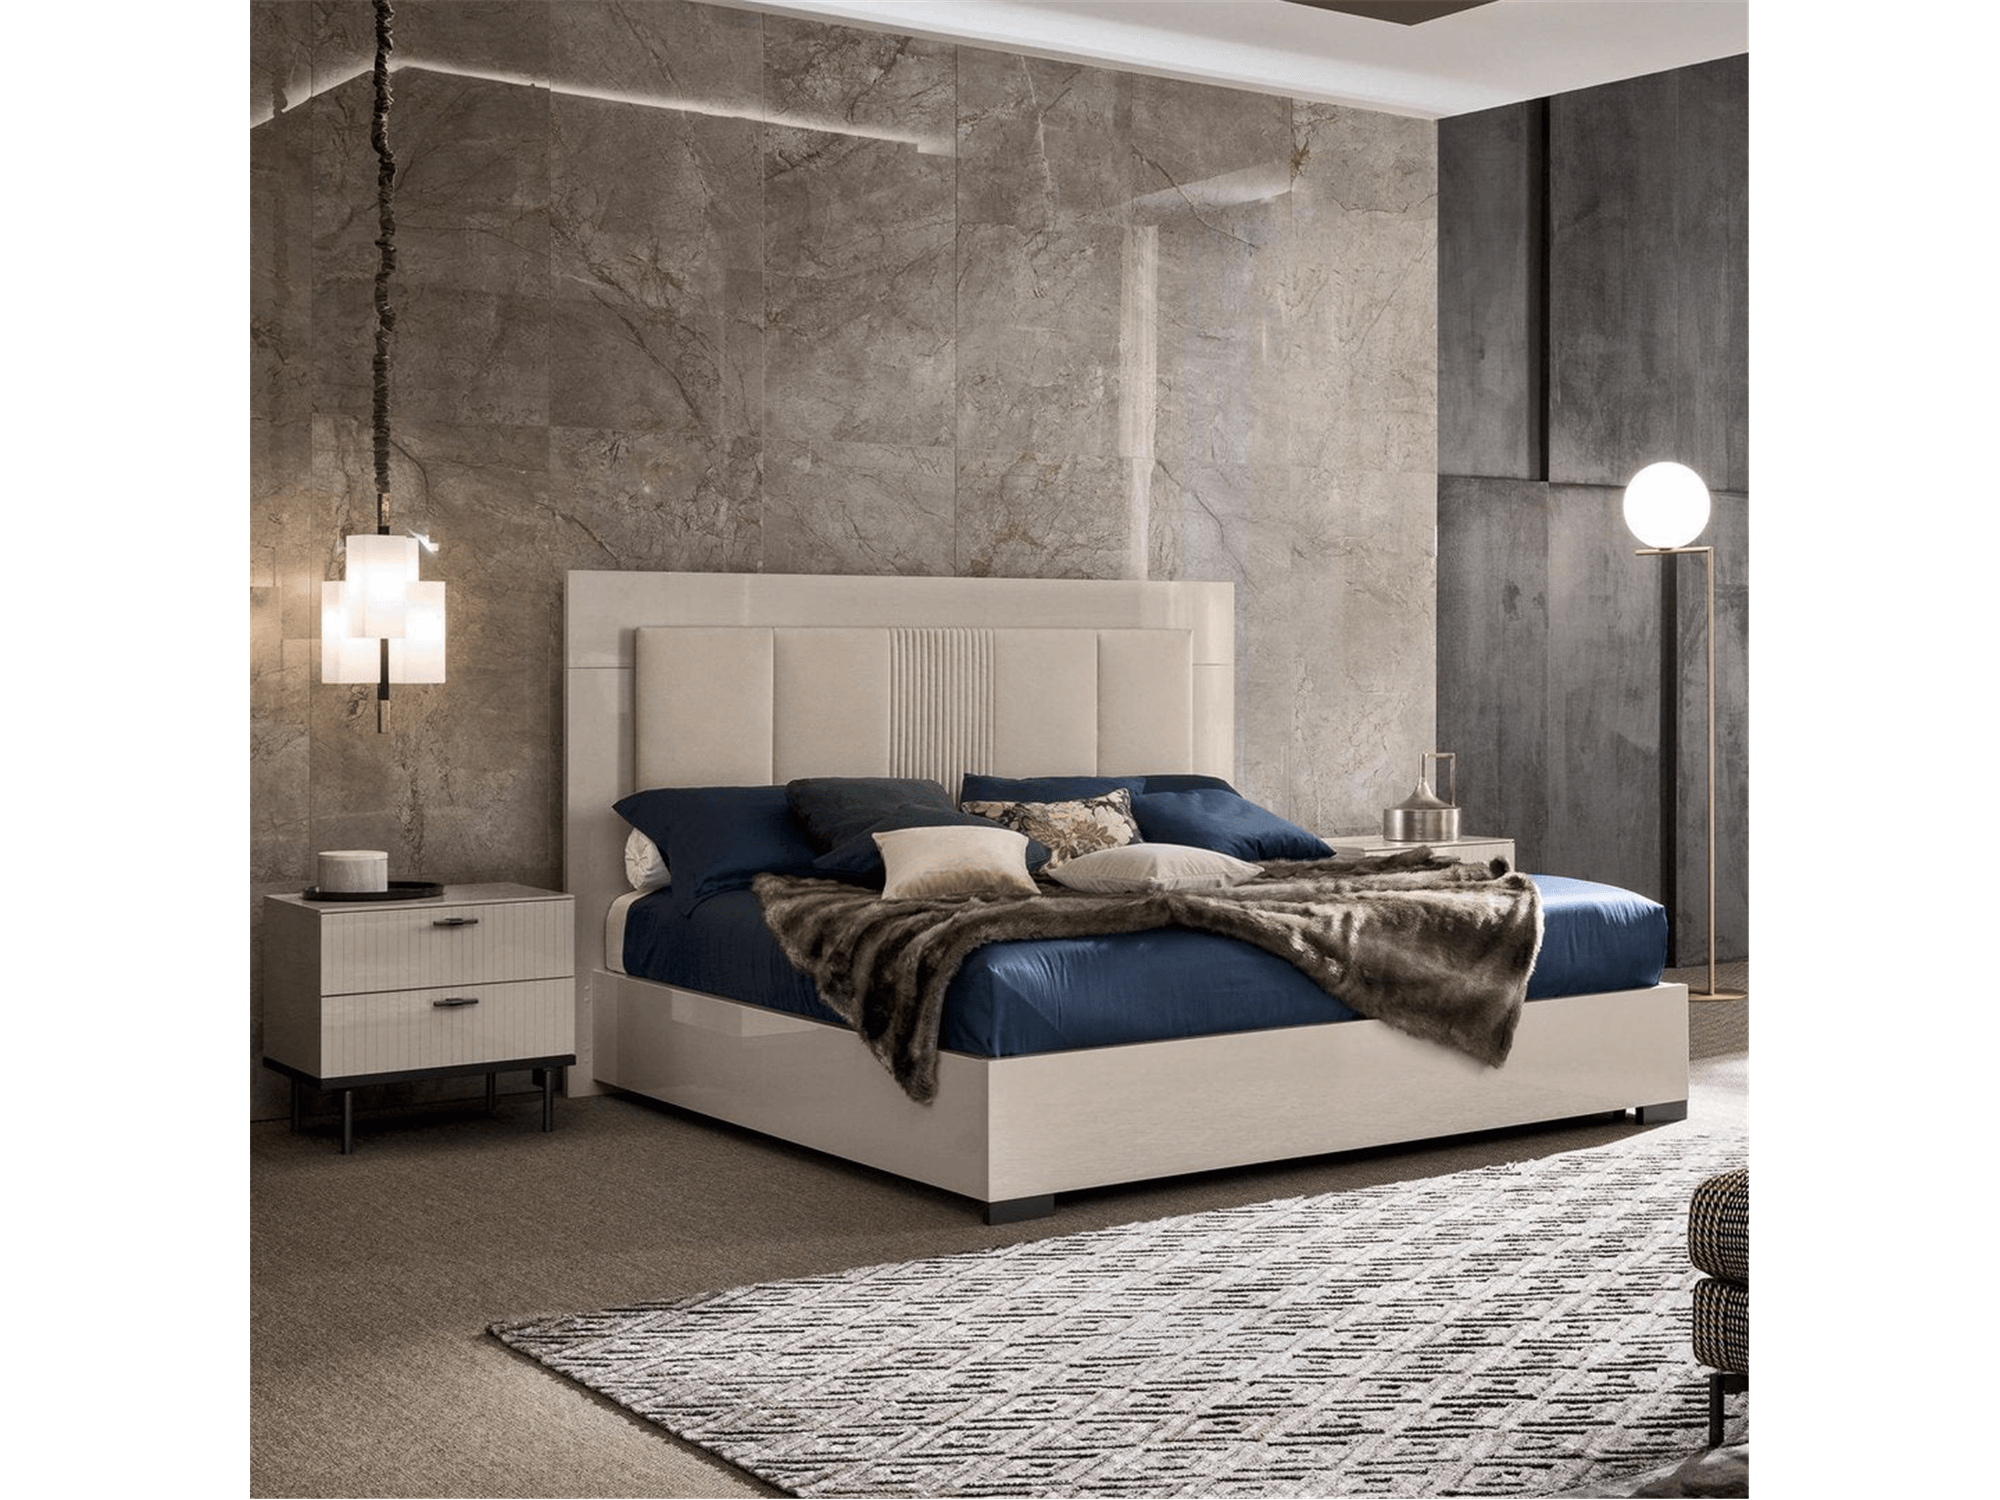 Clara Bed King Size Without LED - Euro Living Furniture